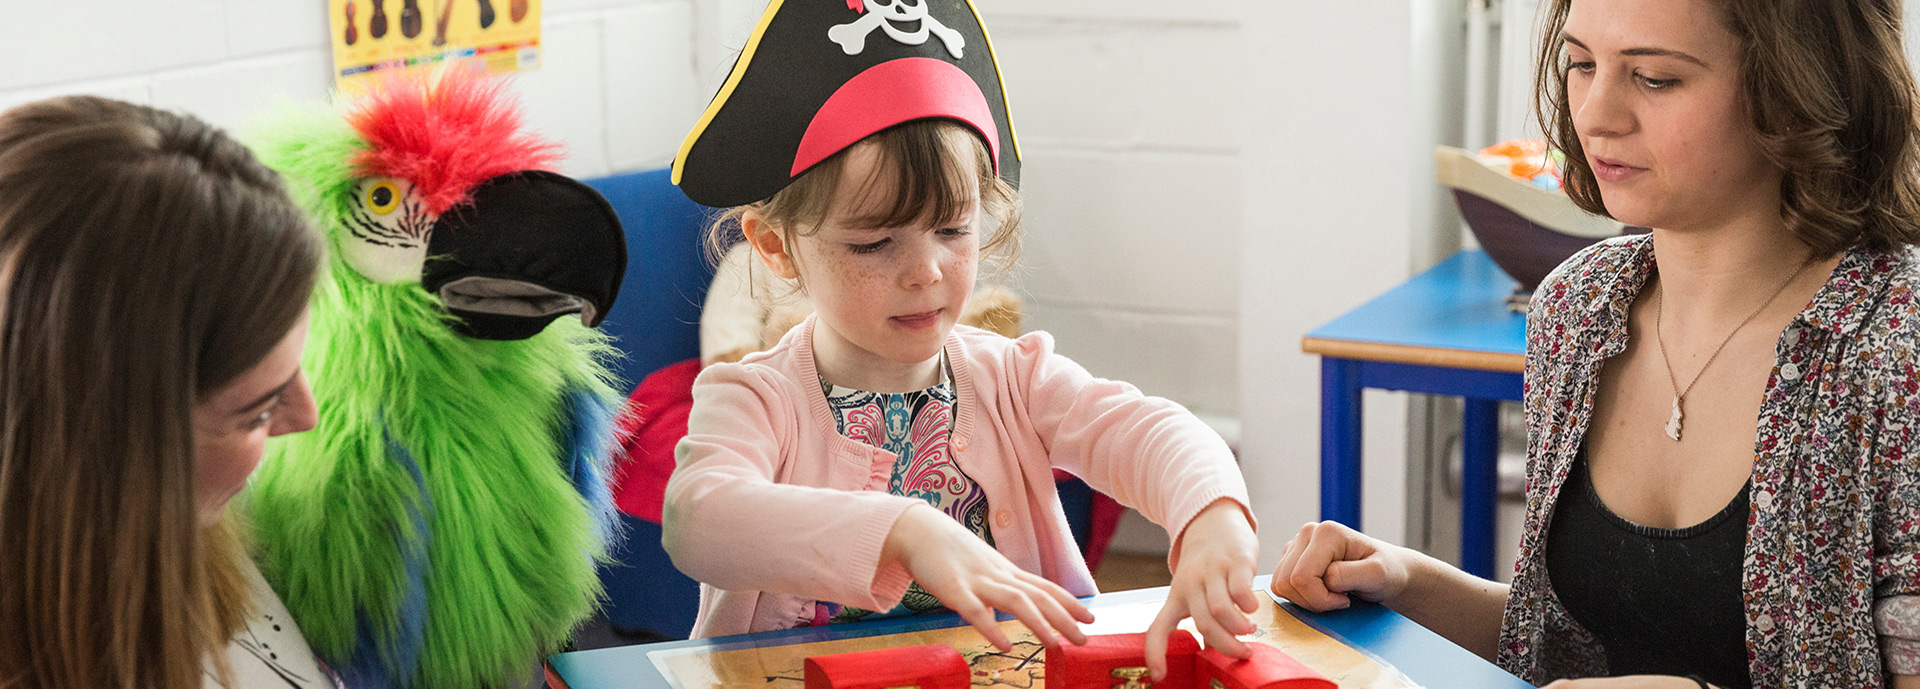 Two researchers, one with toy parrot, and child with pirate hat run an experiment